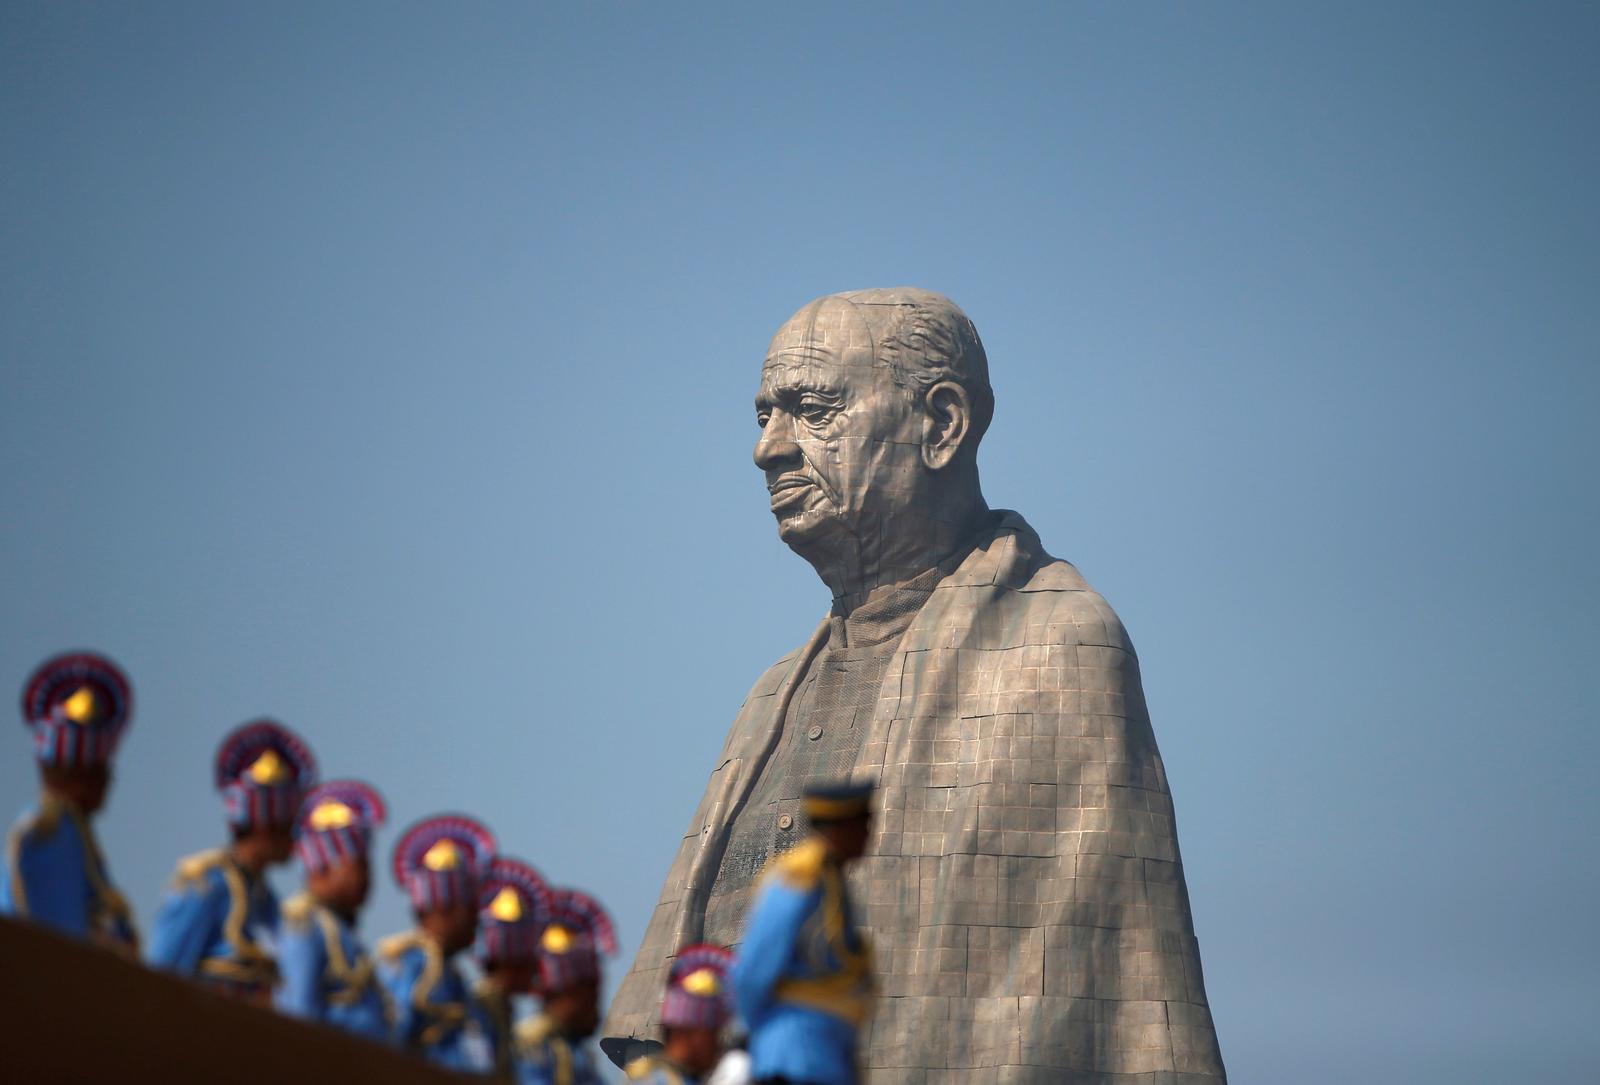 Police officers stand near the “Statue of Unity” portraying Sardar Vallabhbhai Patel, one of the founding fathers of India, during its inauguration in Kevadia